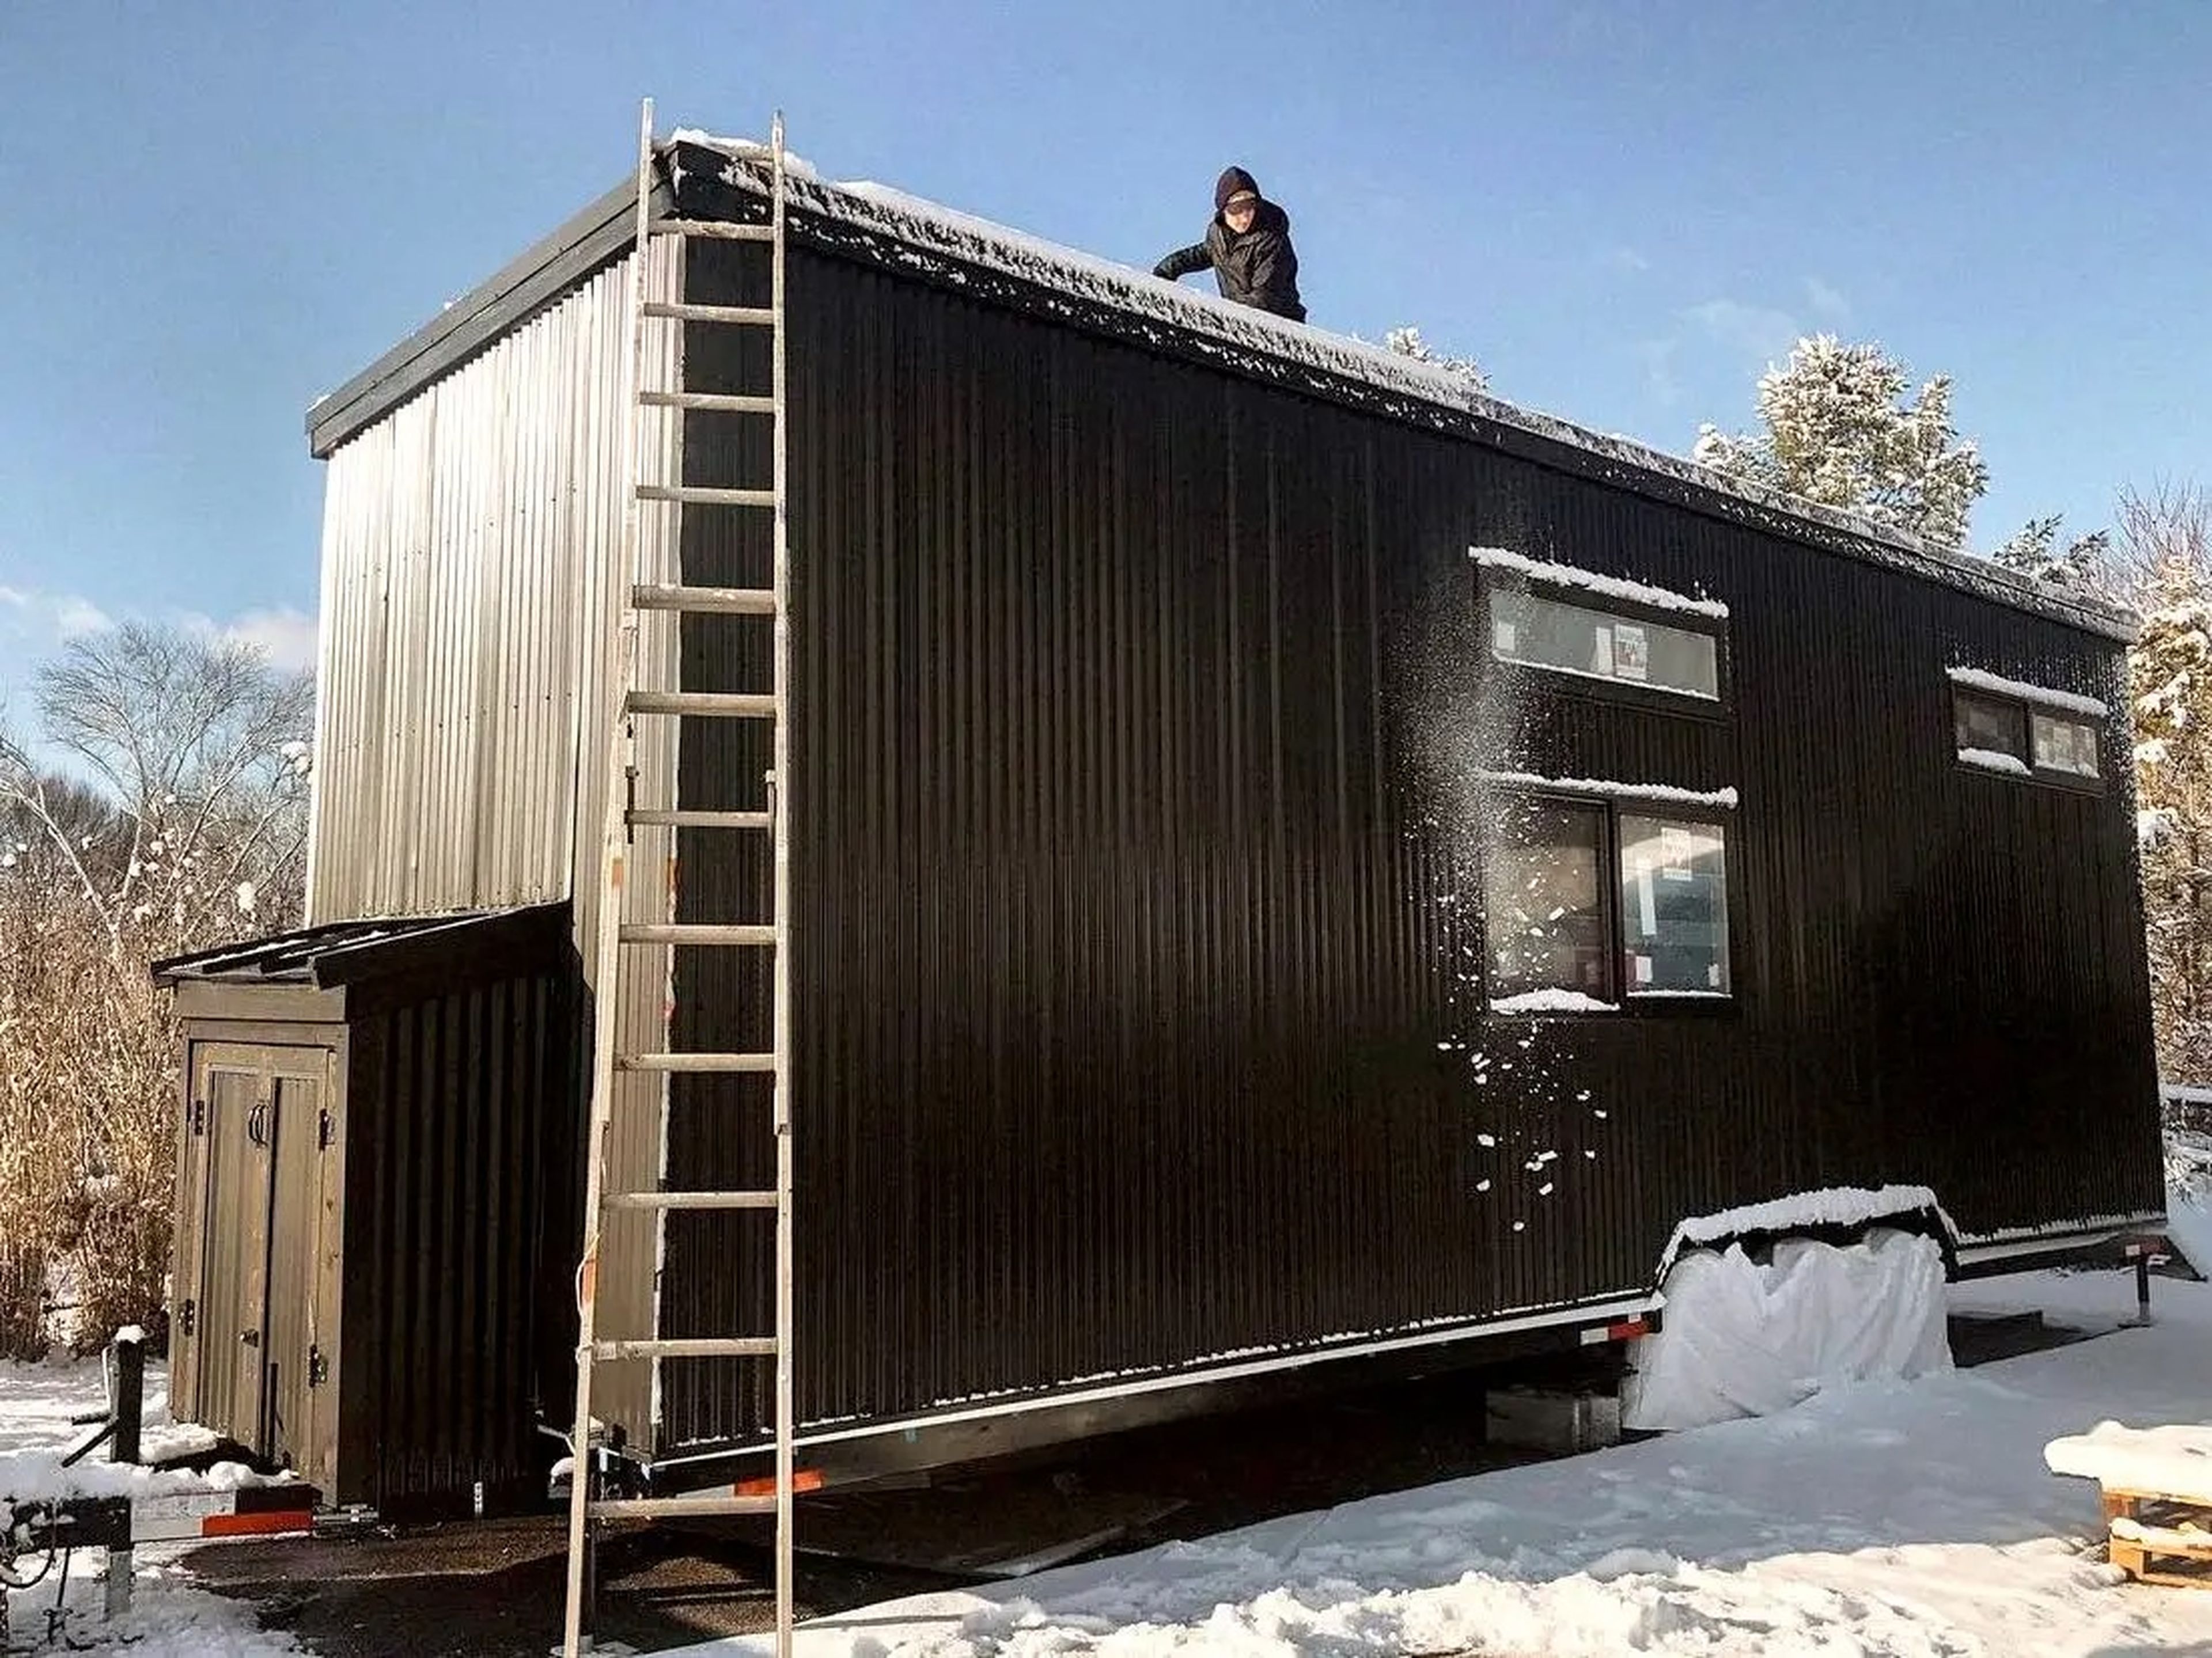 Exterior of black tiny house surrounded by snow and trees